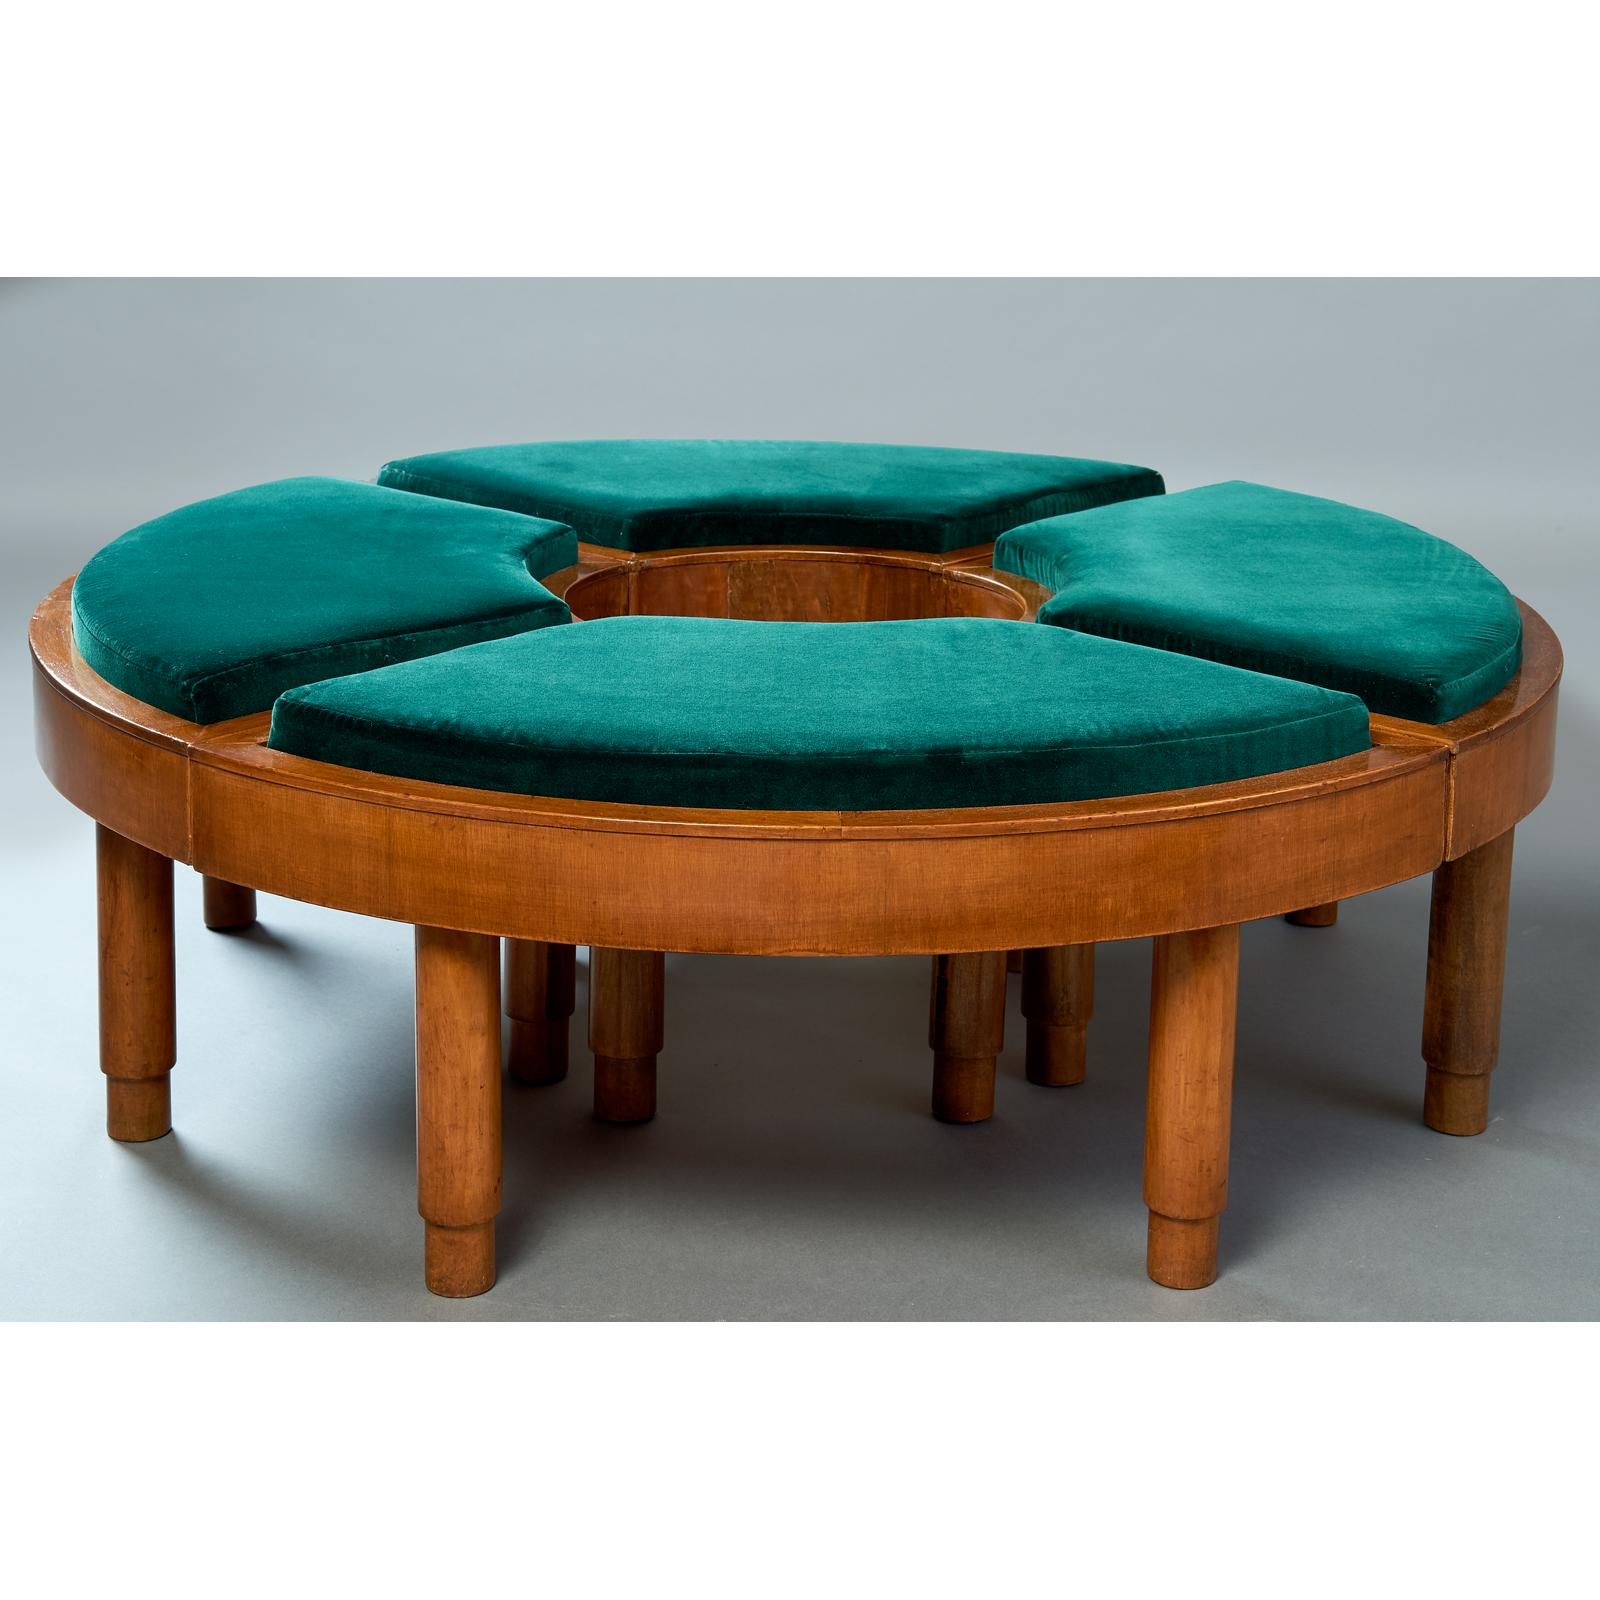 Mid-20th Century Wreath of Four Polished Wood Stools, Italy 1930s